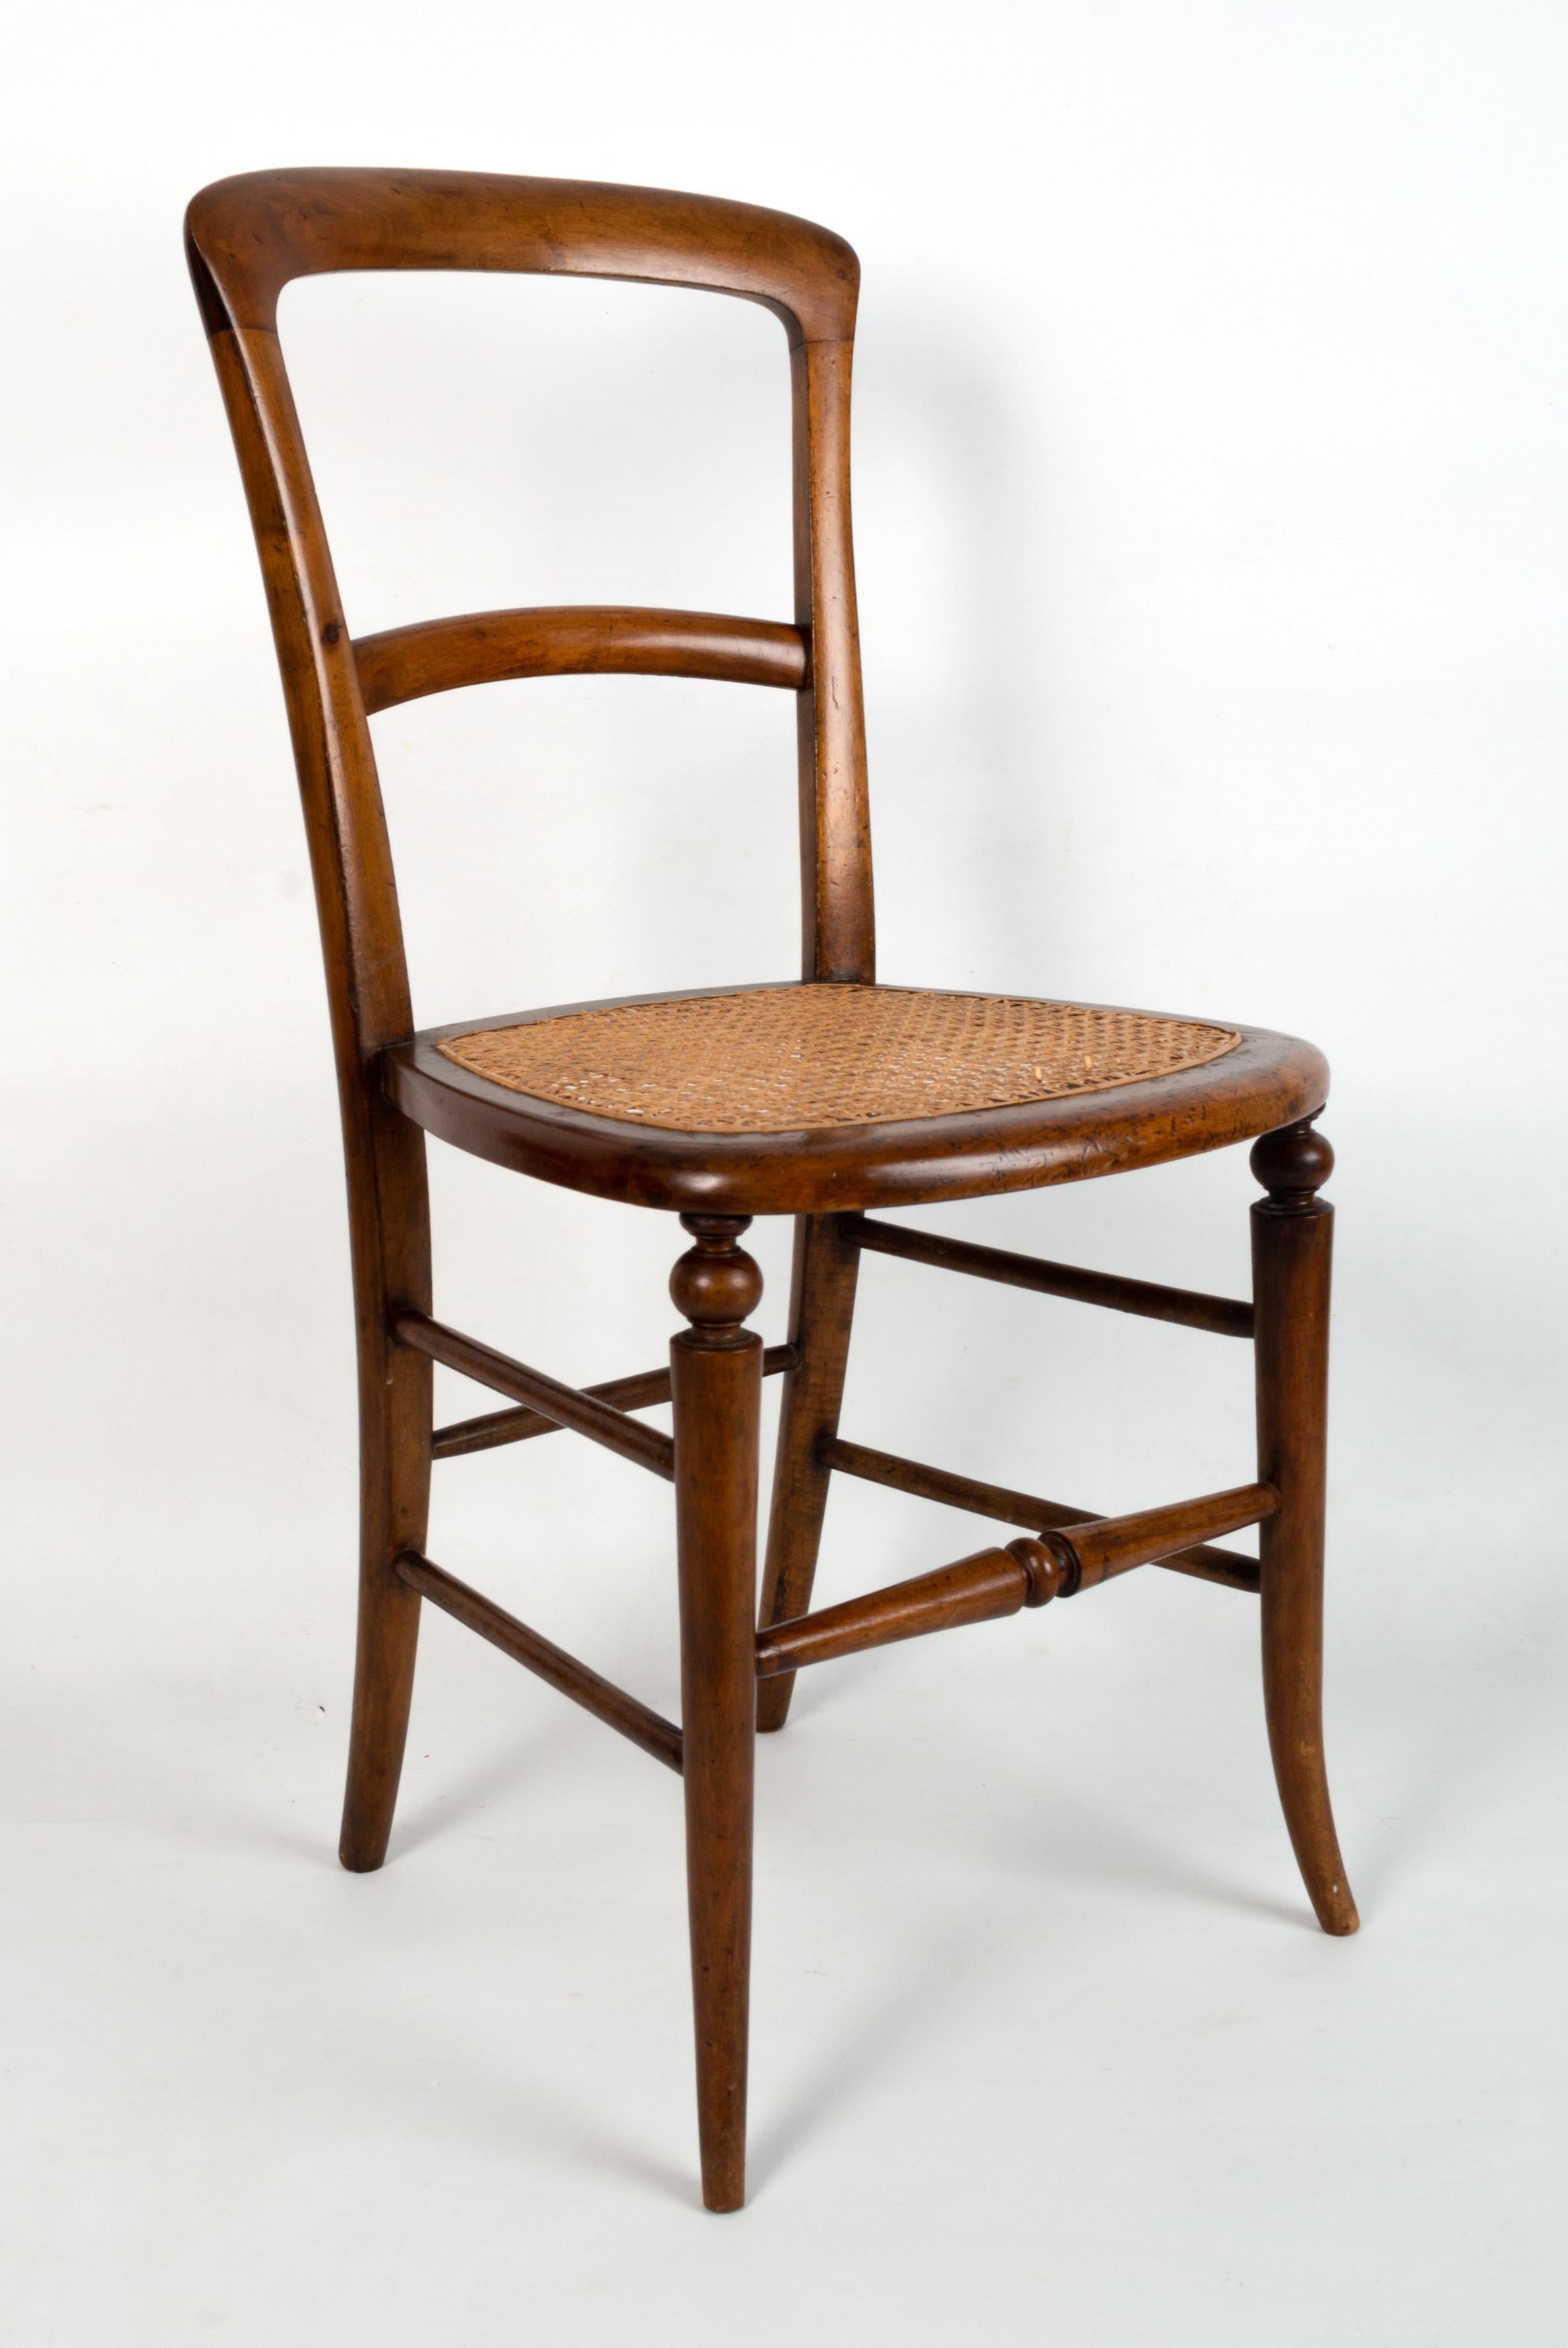 An English 19th Century Victorian Caned Walnut Salon Chair C.1860.

Very good condition commensurate with age. Solid and sturdy.